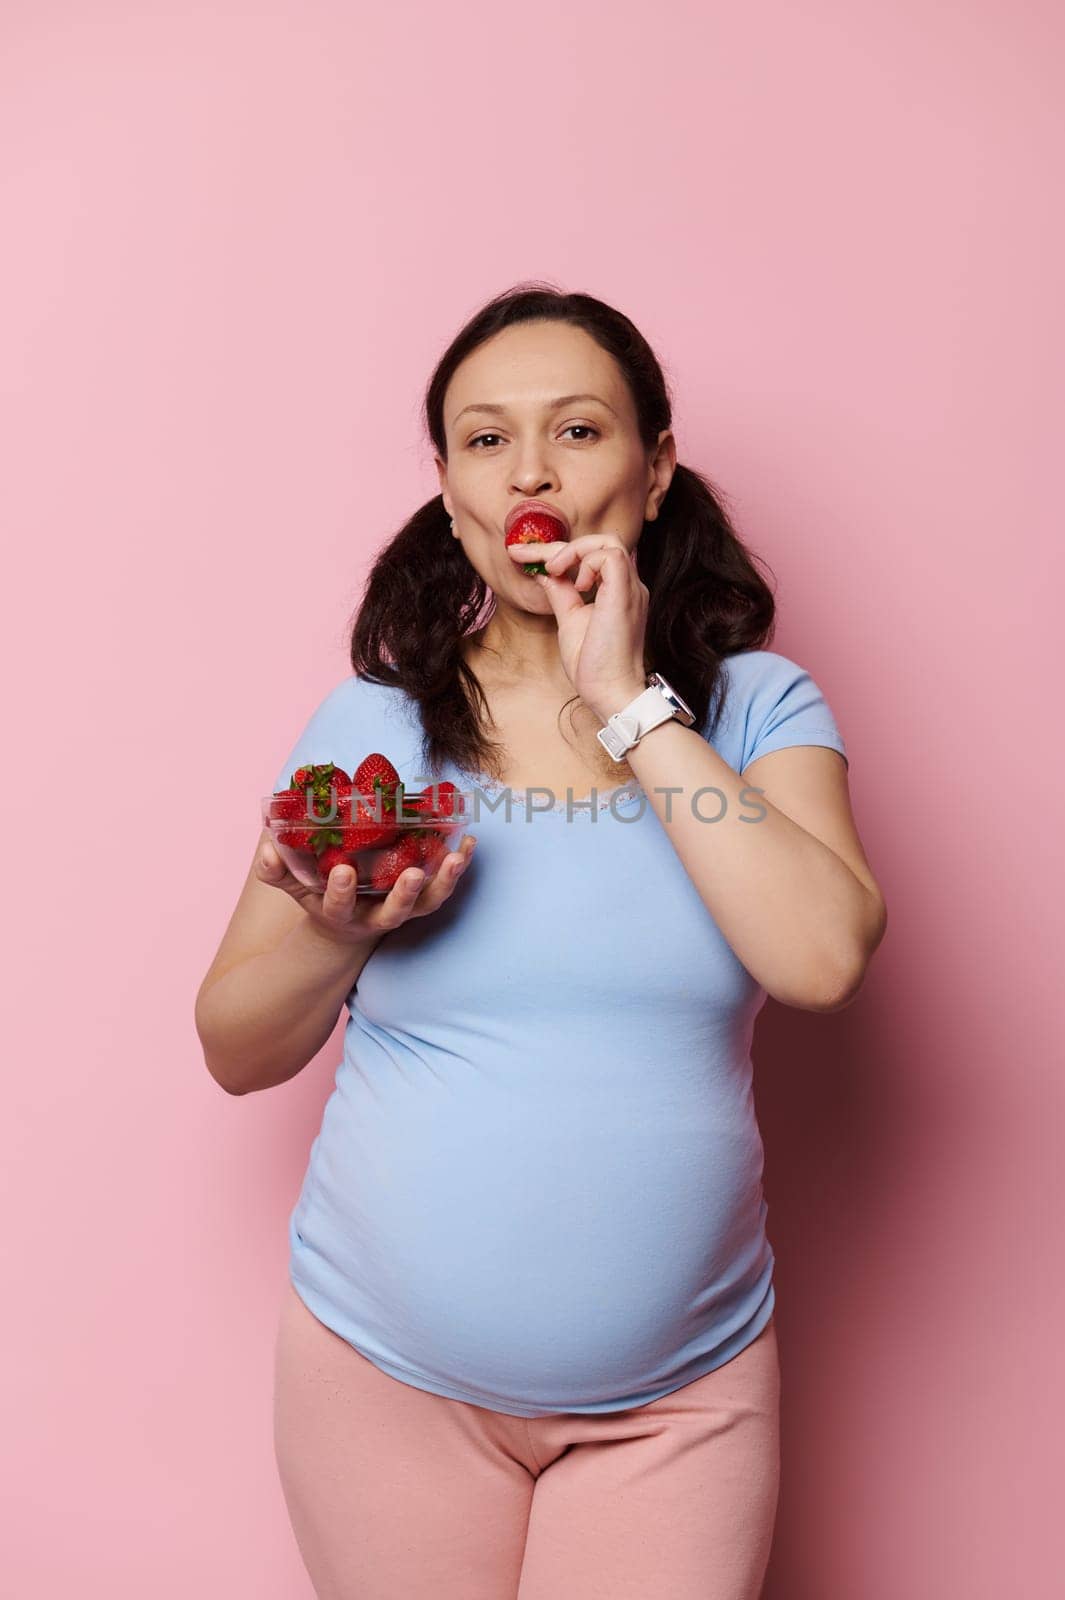 Vertical advertising studio shot on pink background of an expectant pregnant mother in blue t-shirt, looking at camera, holding a bowl with fresh berries and tasting yummy strawberries. Healthy diet